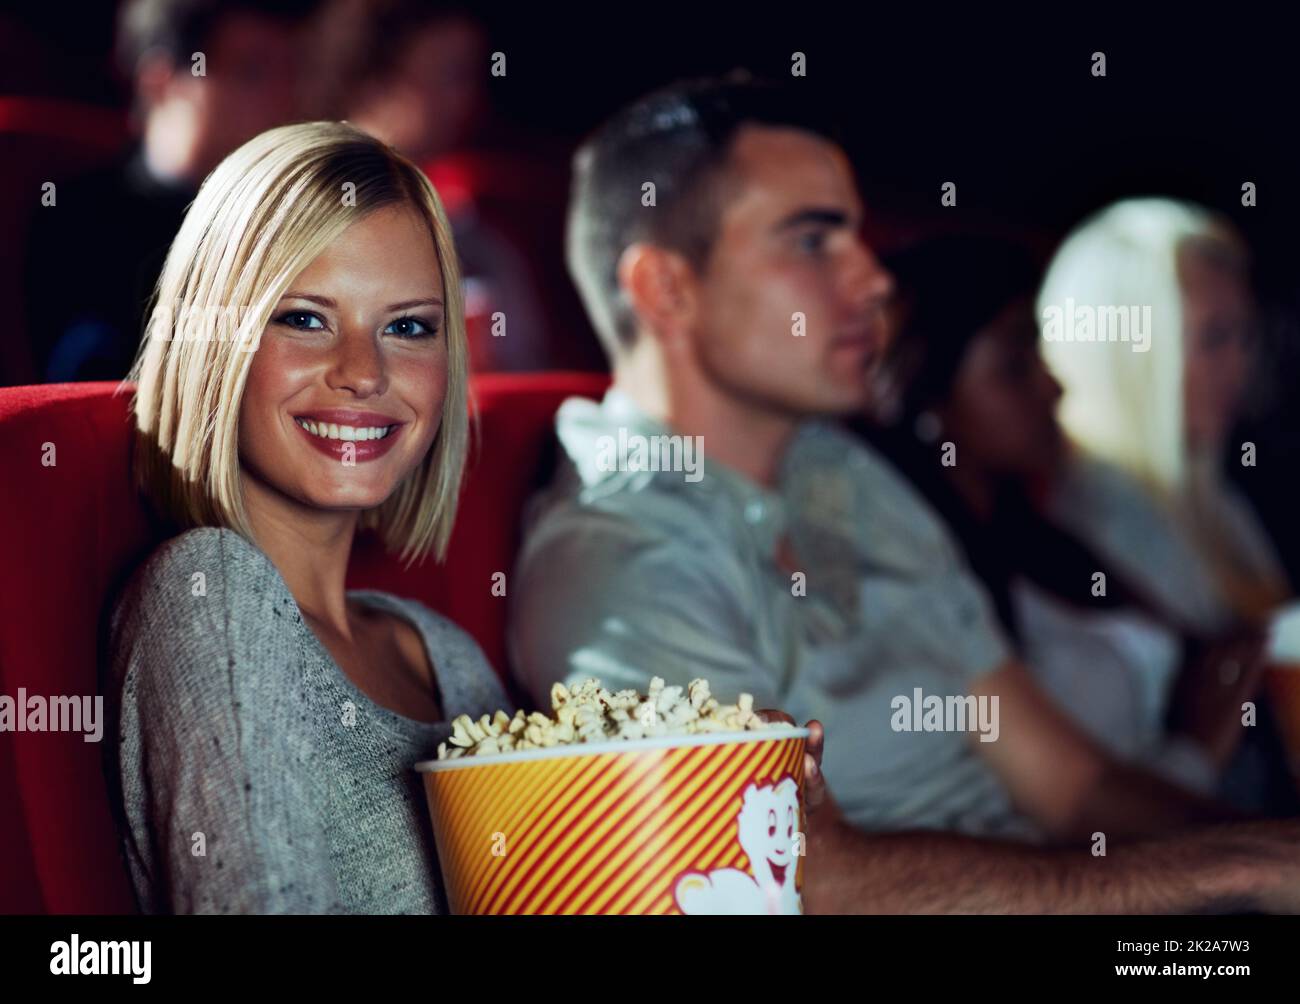 Me and my popcorn. A young girl eating popcorn while watching a movie at the cinema with her boyfriend. Stock Photo